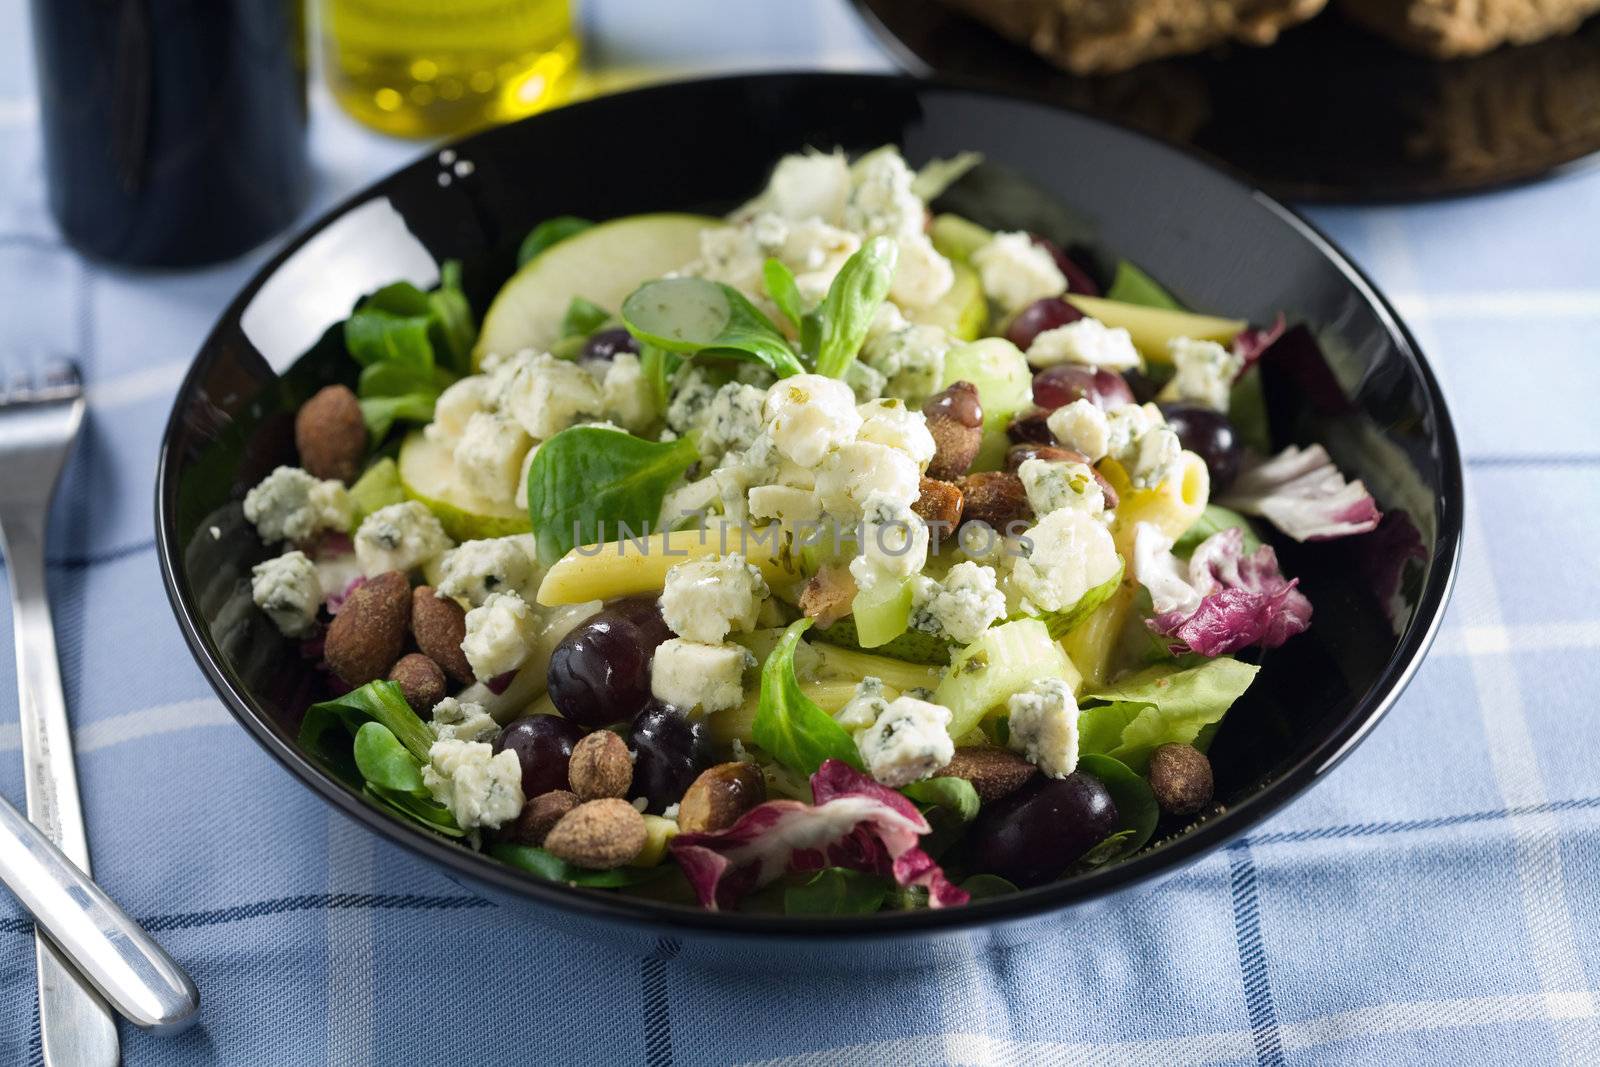 Delicious and healthy green salad with roquefort and grapes